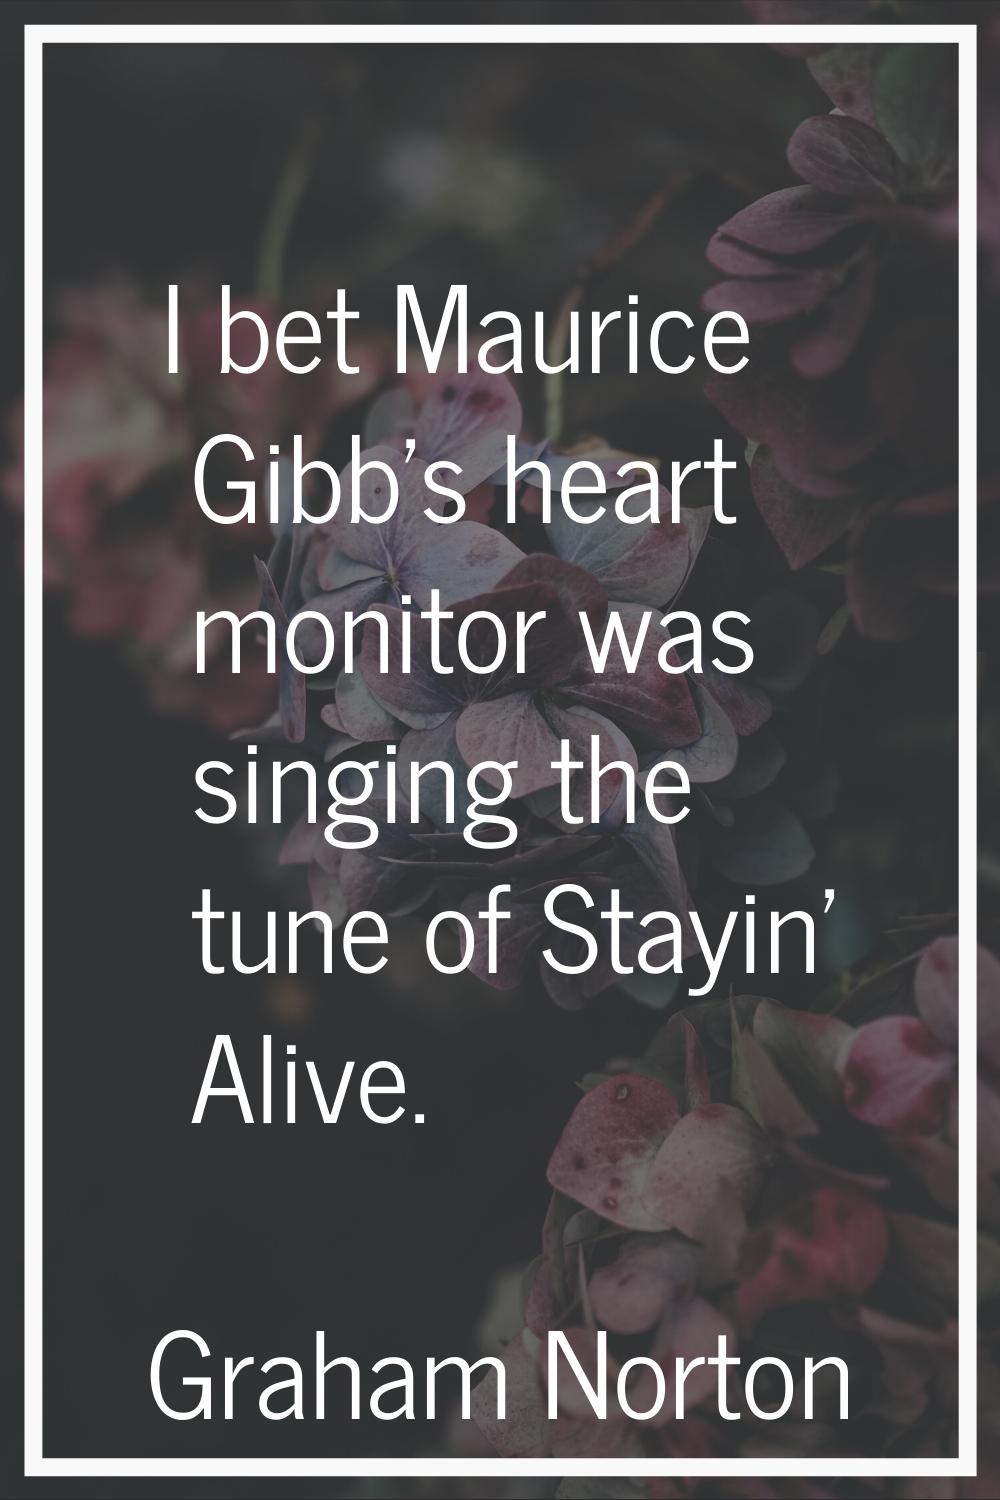 I bet Maurice Gibb's heart monitor was singing the tune of Stayin' Alive.